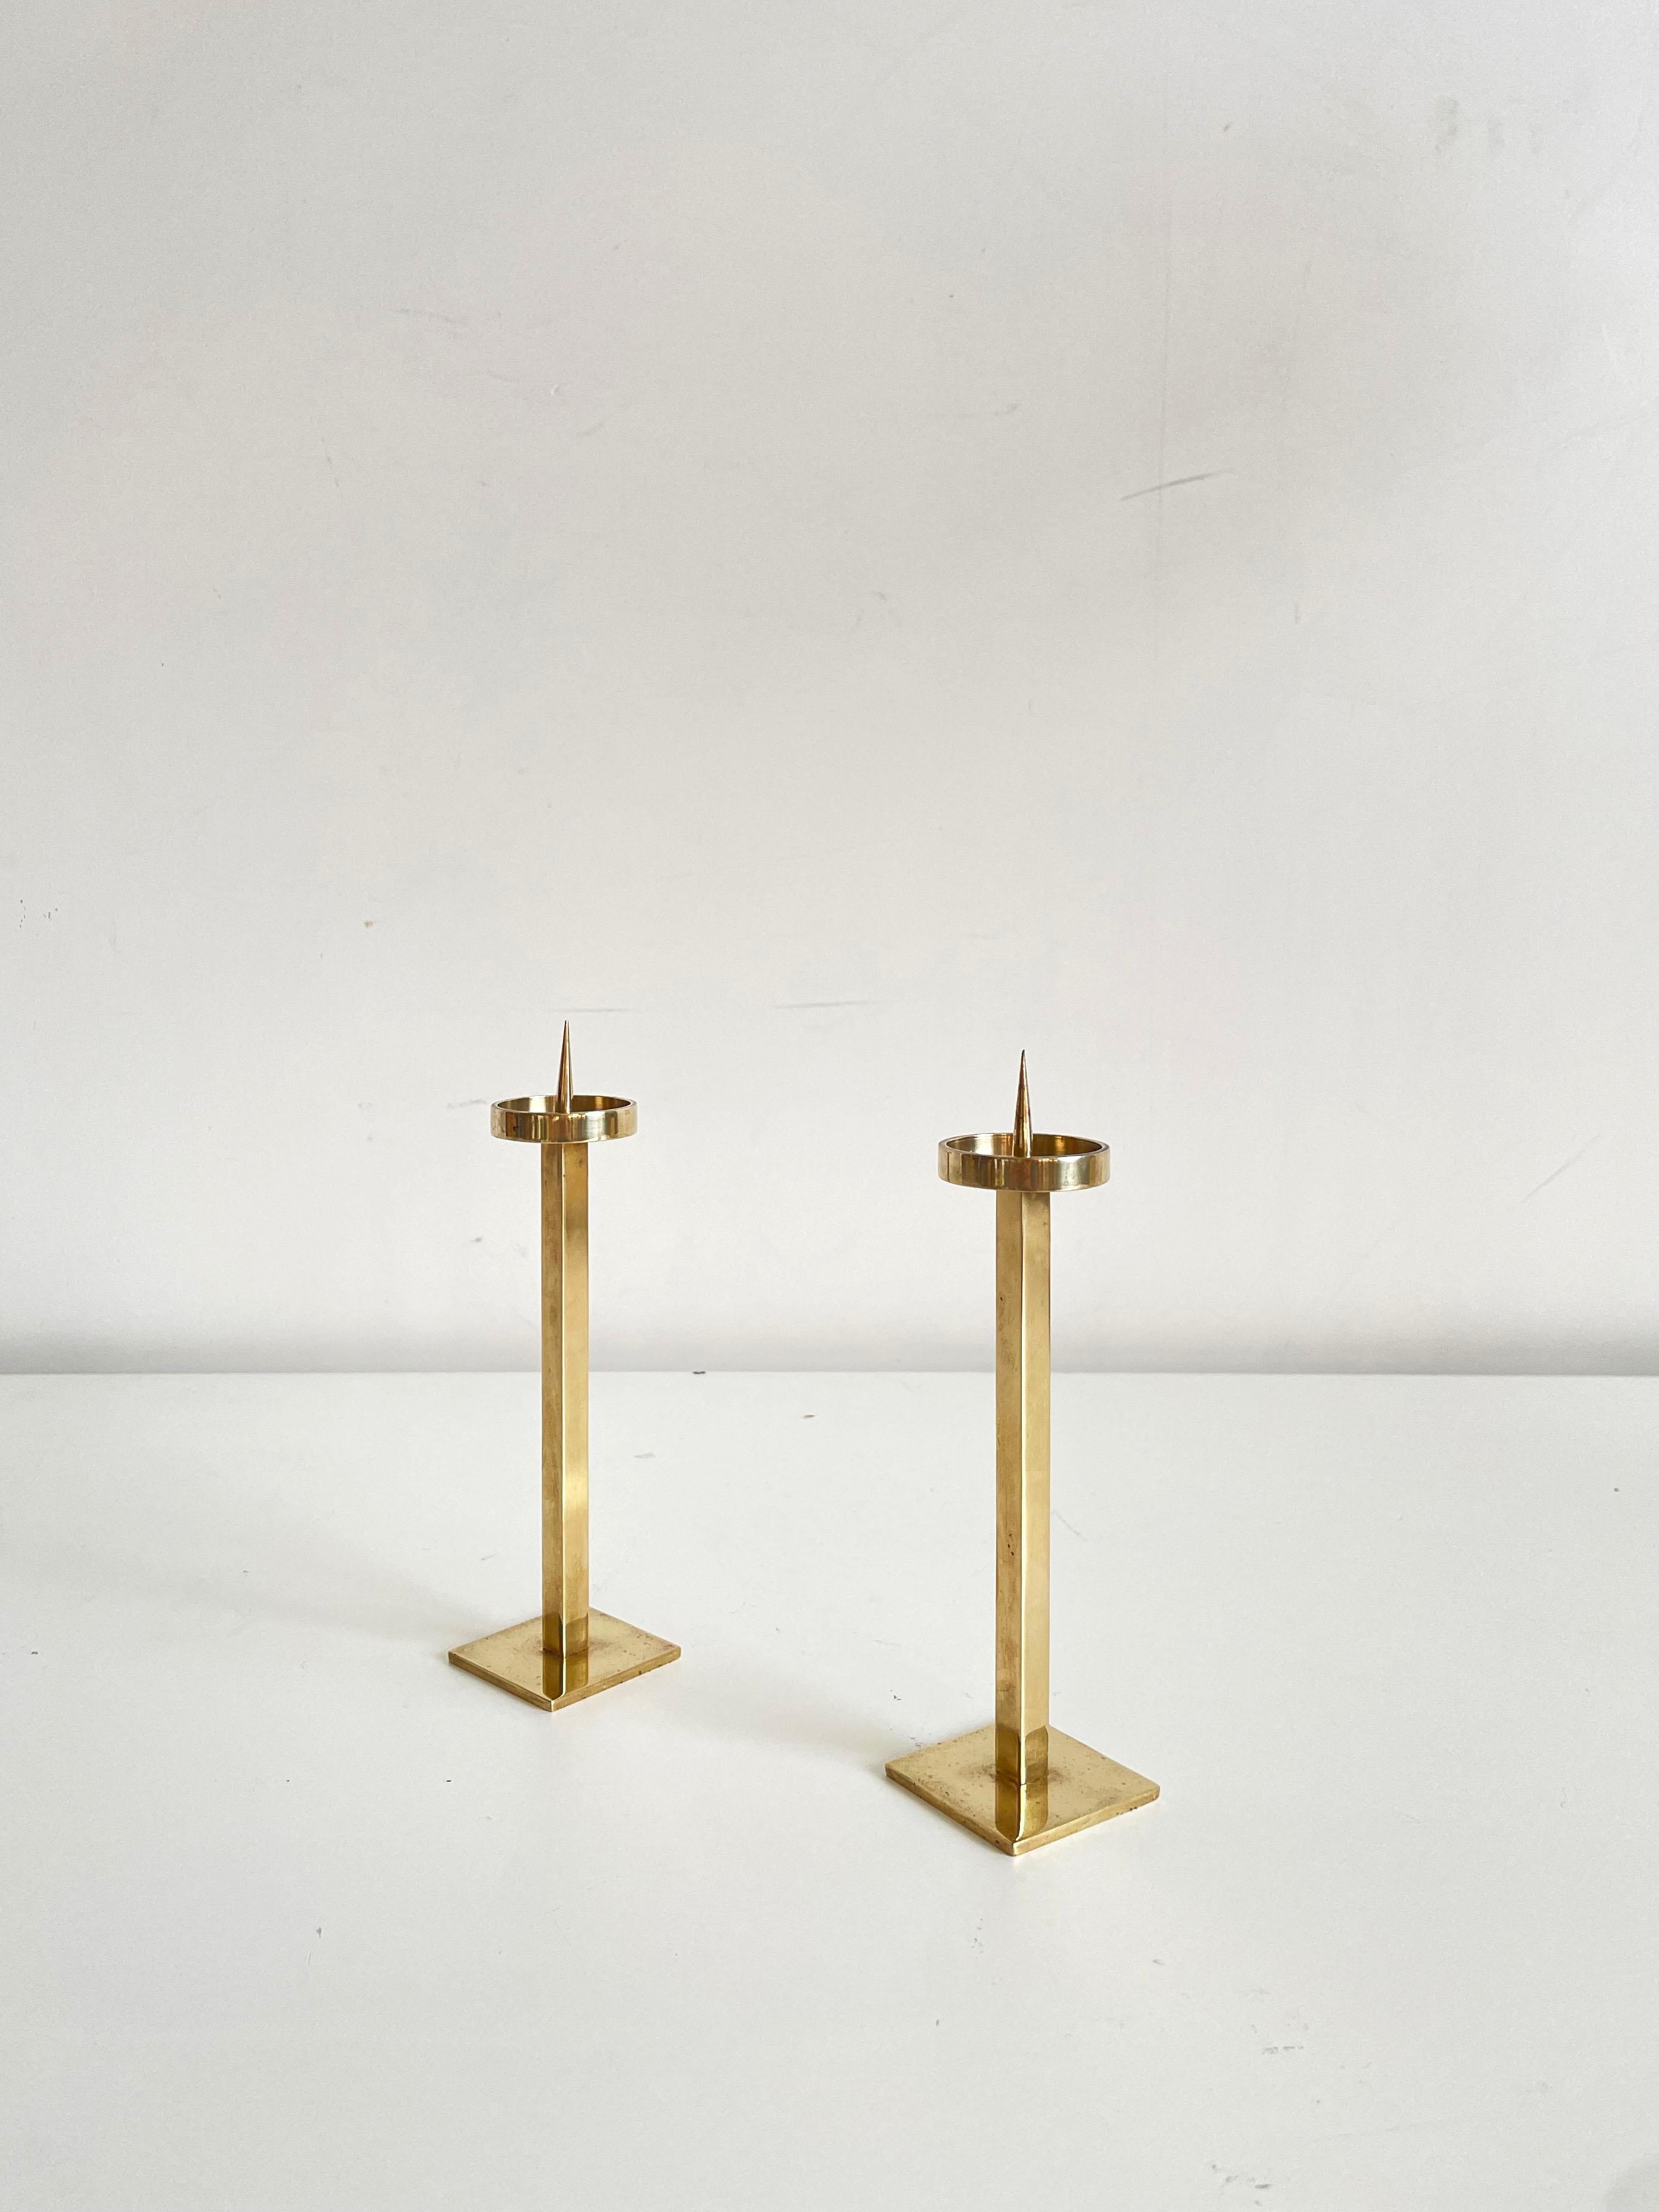 Pair of vintage Mid-century solid brass candlestick holders in shiny gold color

Small size, sophisticated slender minimalist form, but cannot get unnoticed 

diameter of the candle cup is 3.5 cm

The candle holders are in very good vintage